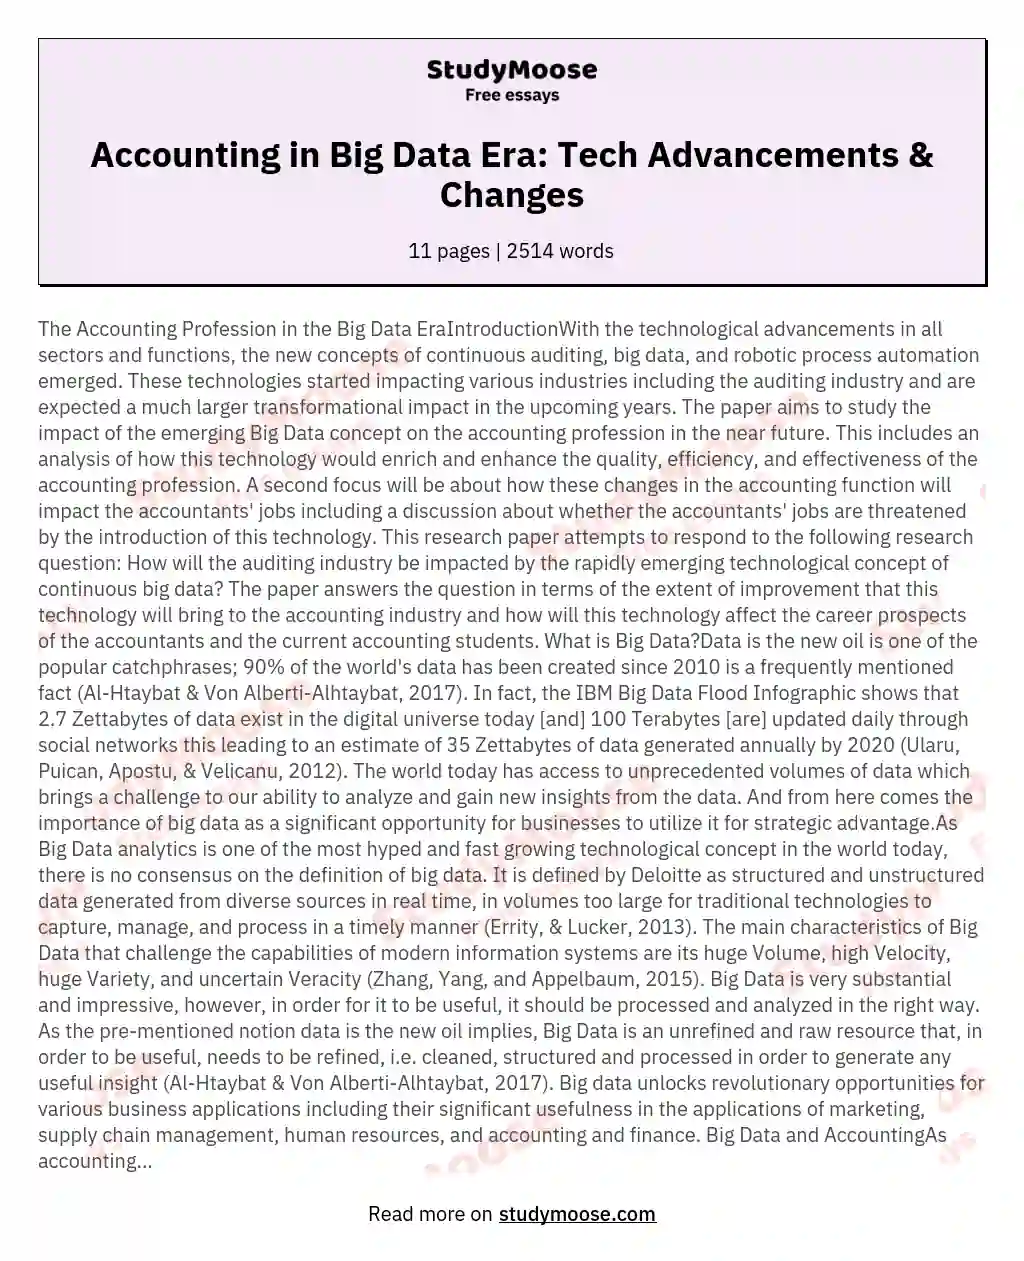 The Accounting Profession in the Big Data EraIntroductionWith the technological advancements in